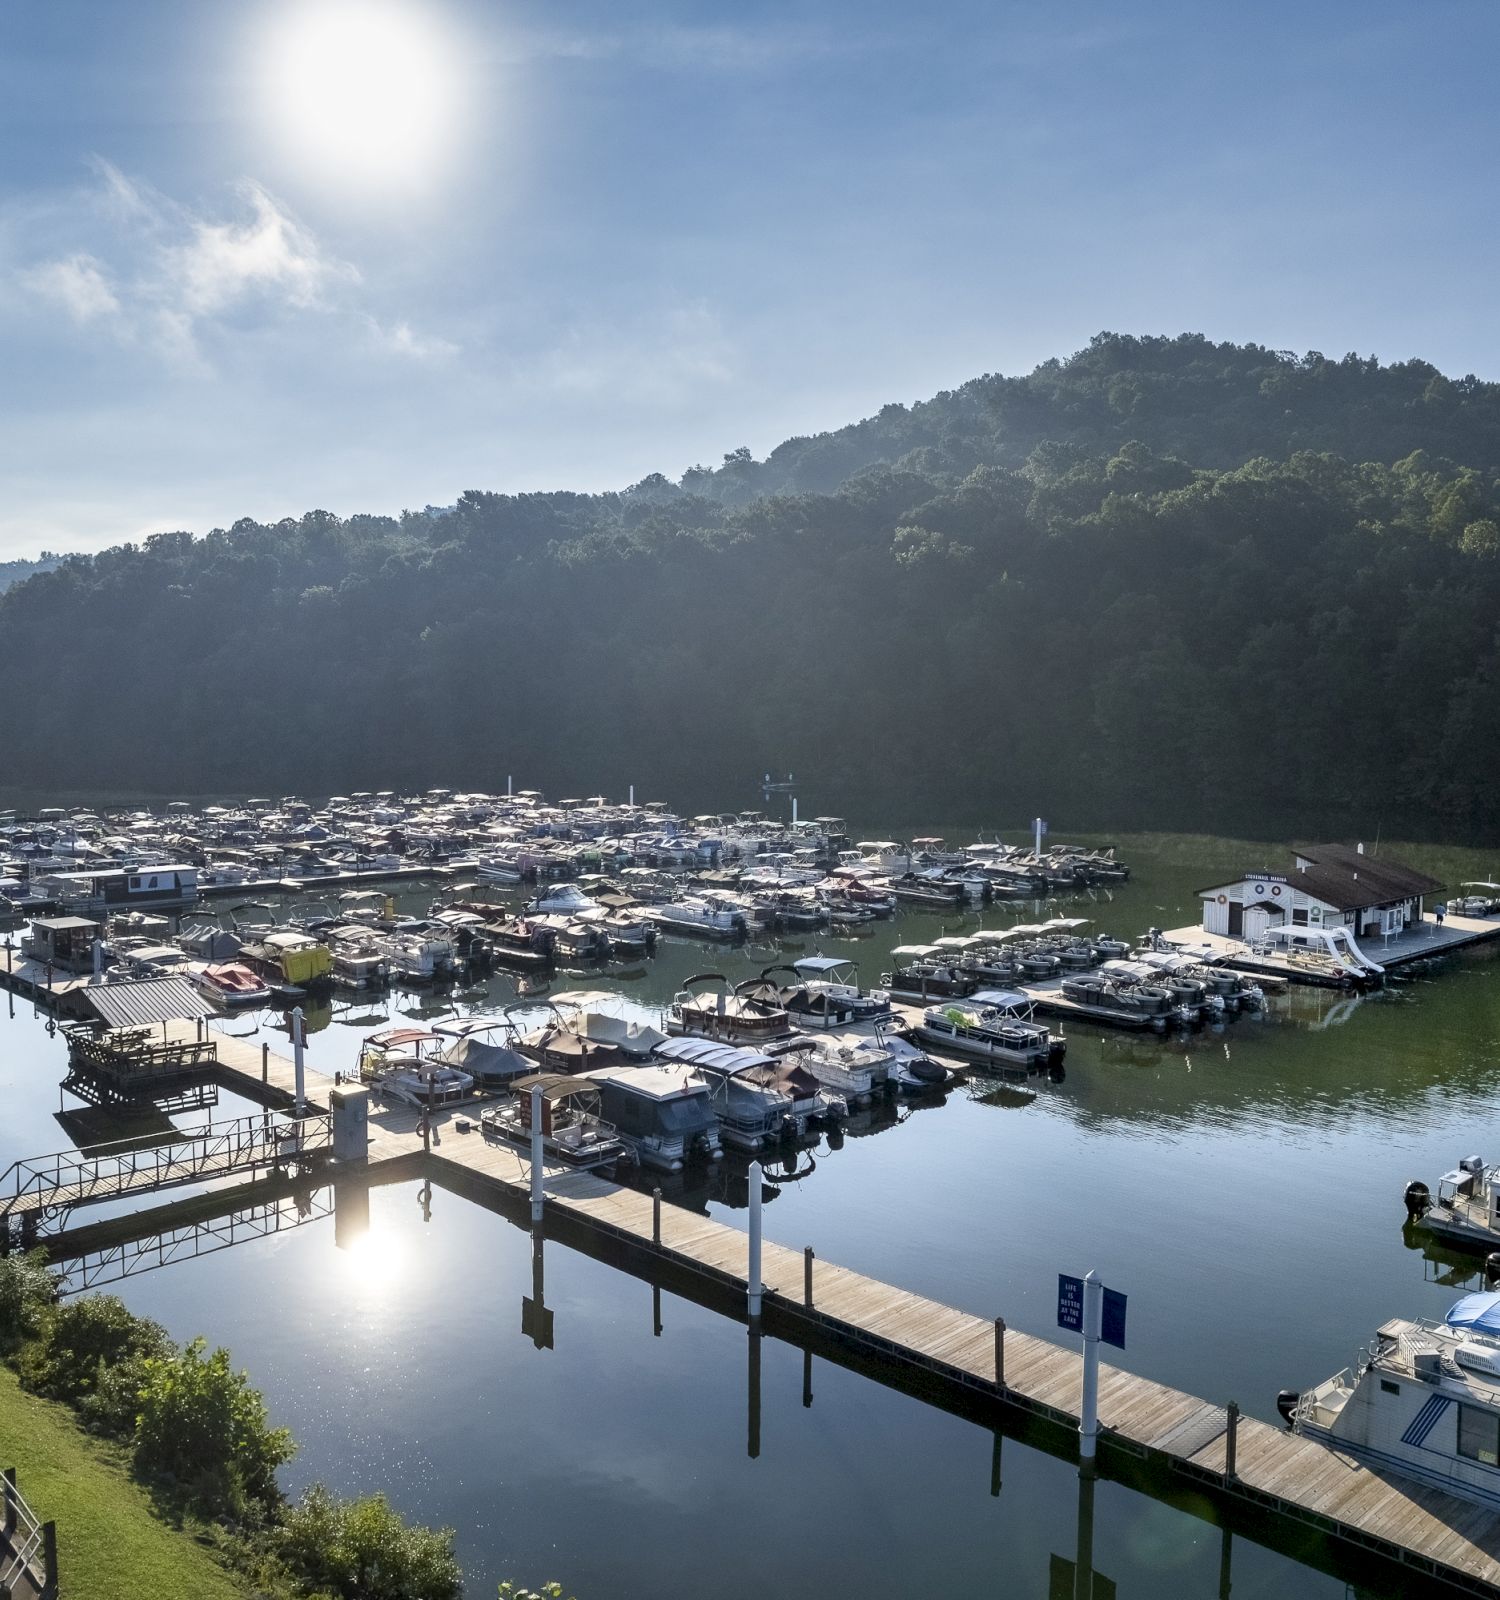 A marina filled with boats sits on a calm body of water surrounded by green hills under a bright sun, ending the sentence.